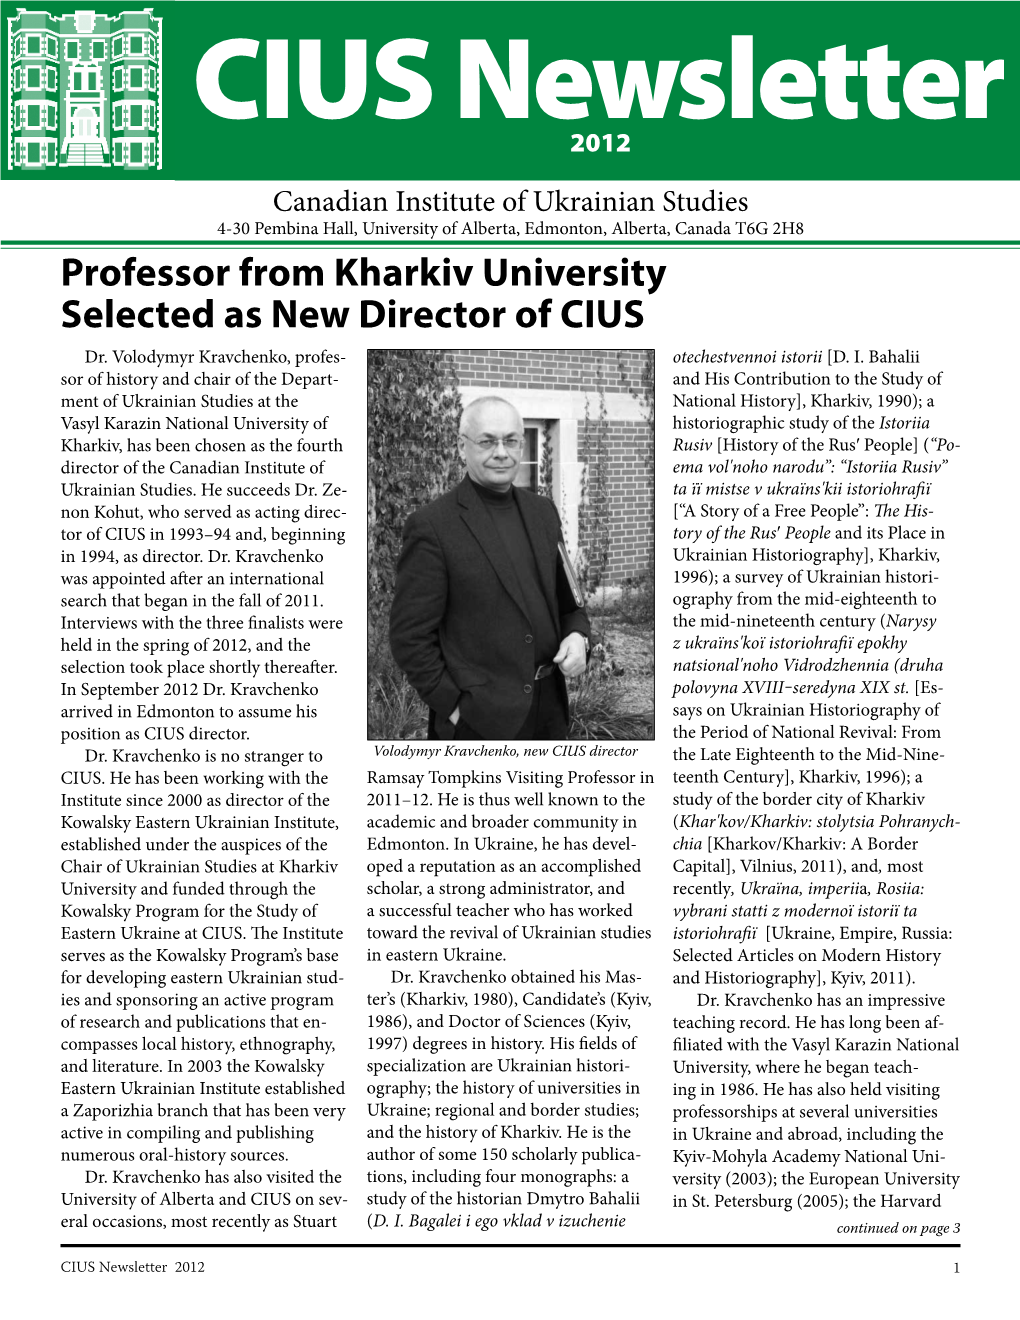 Professor from Kharkiv University Selected As New Director of CIUS Dr